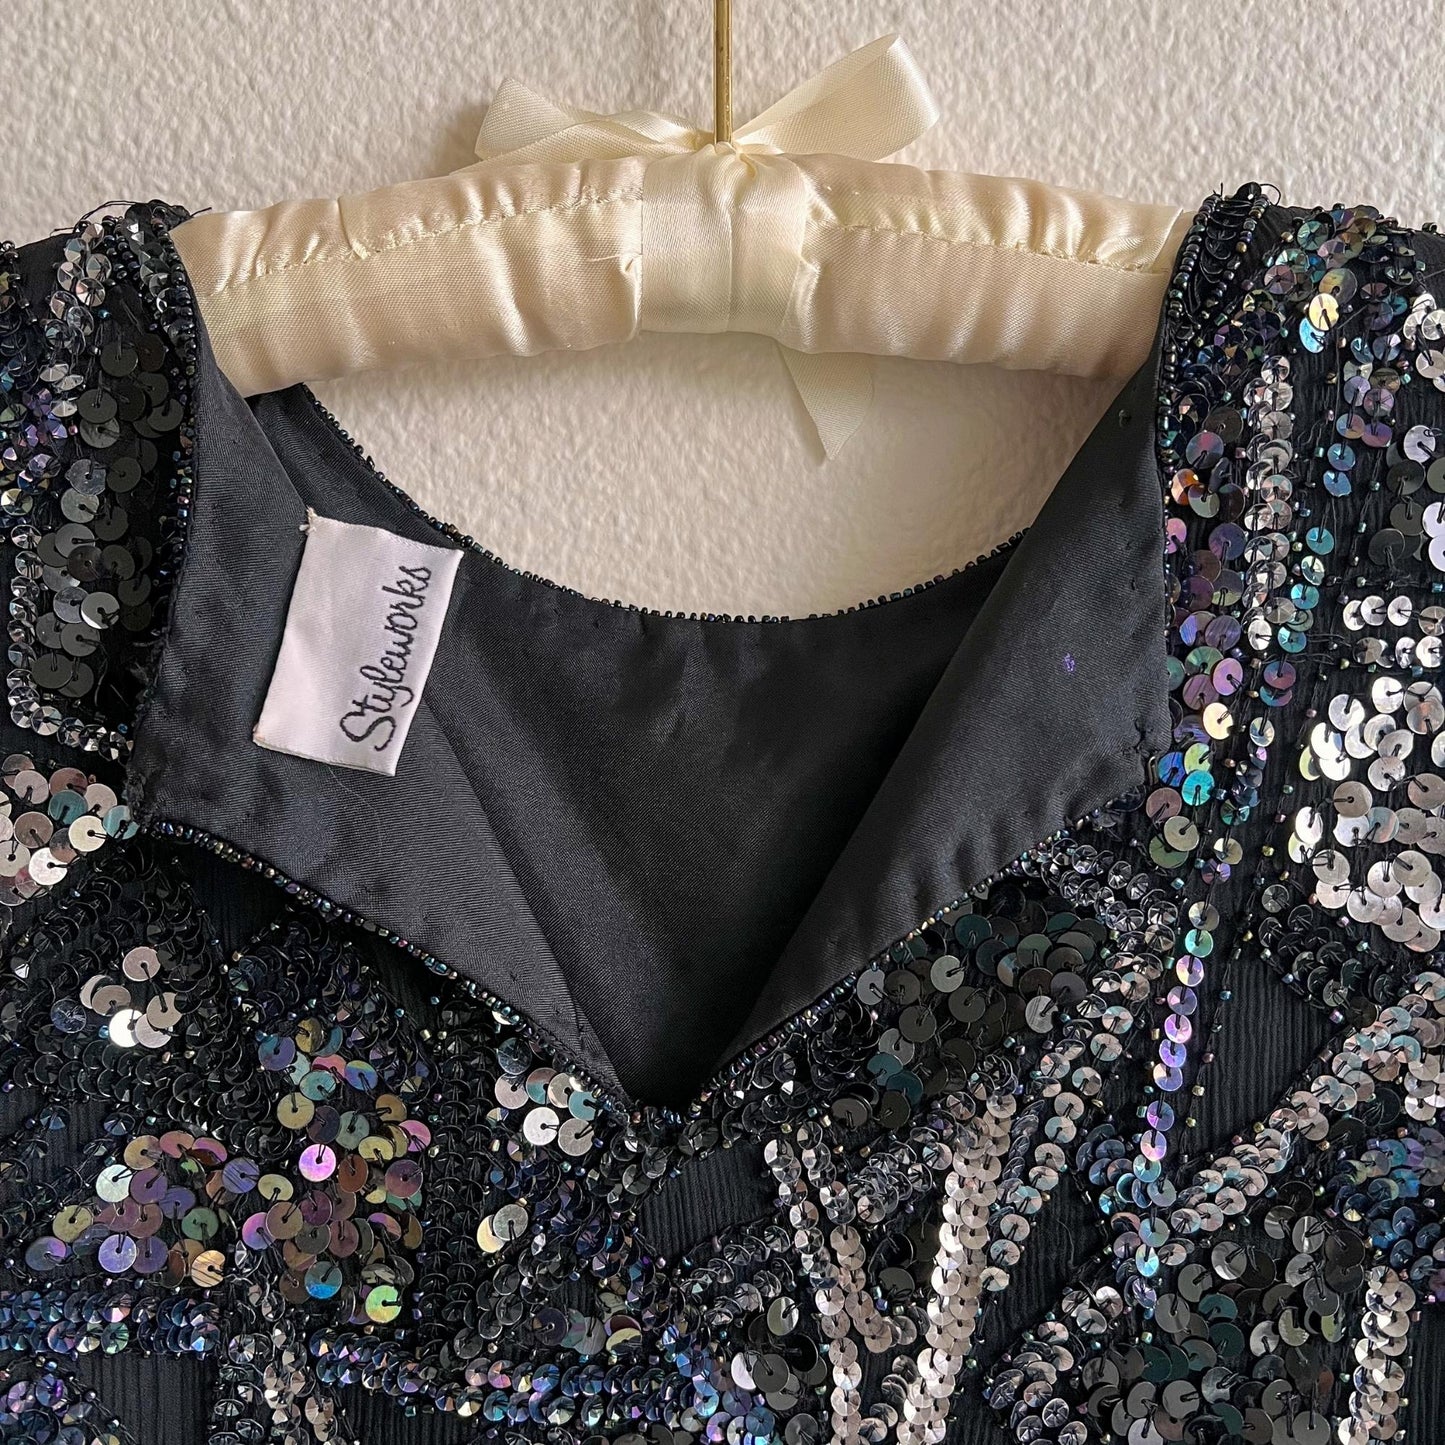 1980s Black Sequined Triangles Blouse (S/M)